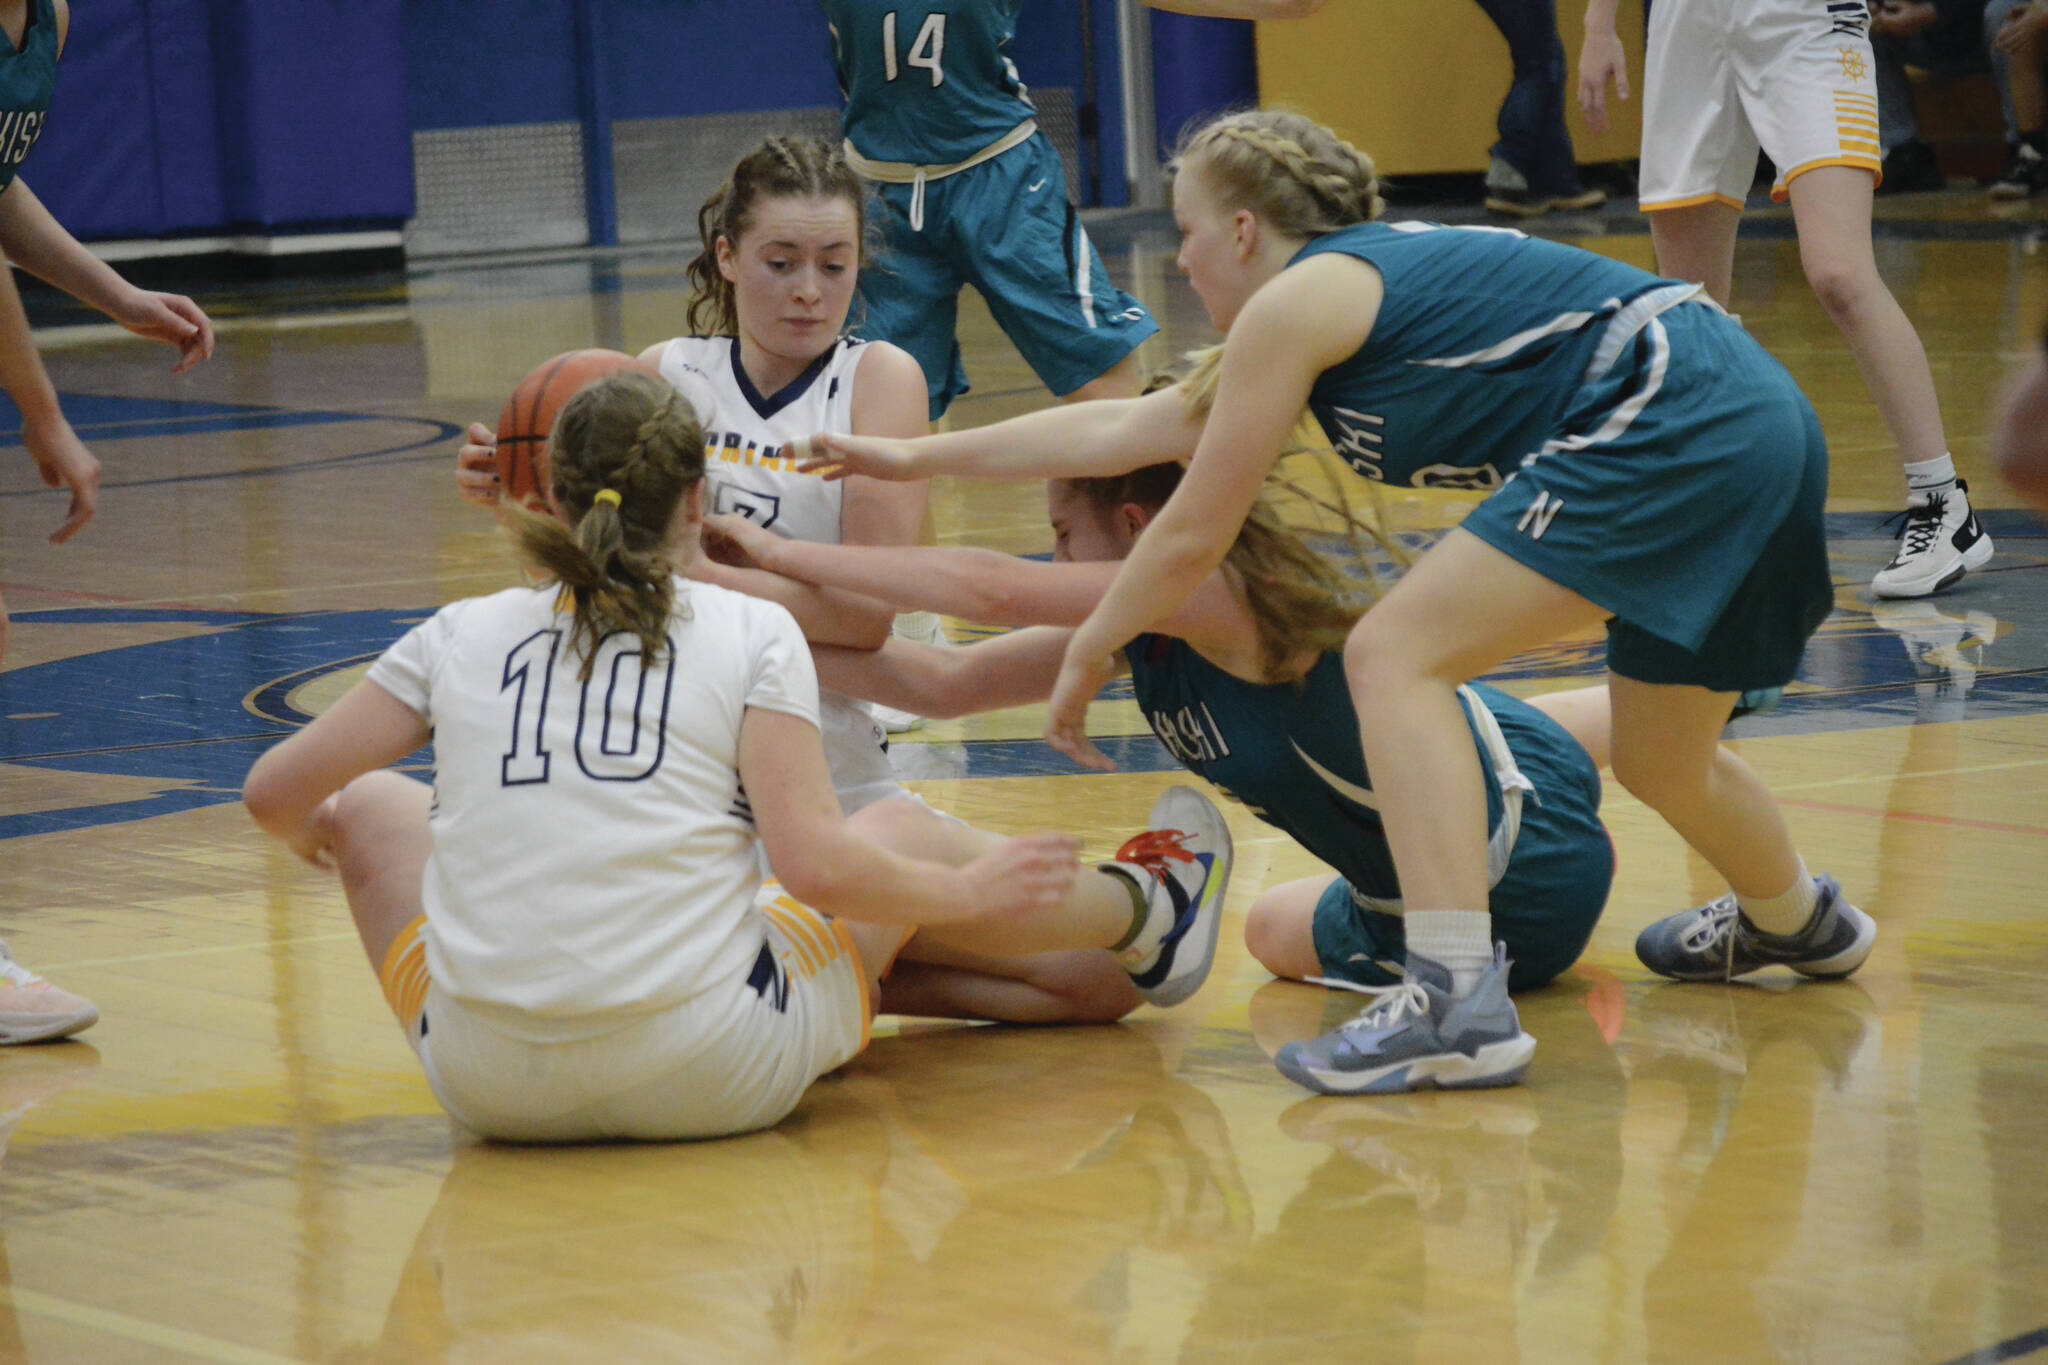 Lady Mariner Kaylin Anderson keeps the ball away from the Lady Bulldogs during Senior Night on Friday, Feb. 25, 2022, at the Alice Witte Gym at Homer High School in Homer, Alaska. (Photo by Michael Armstrong/Homer News)